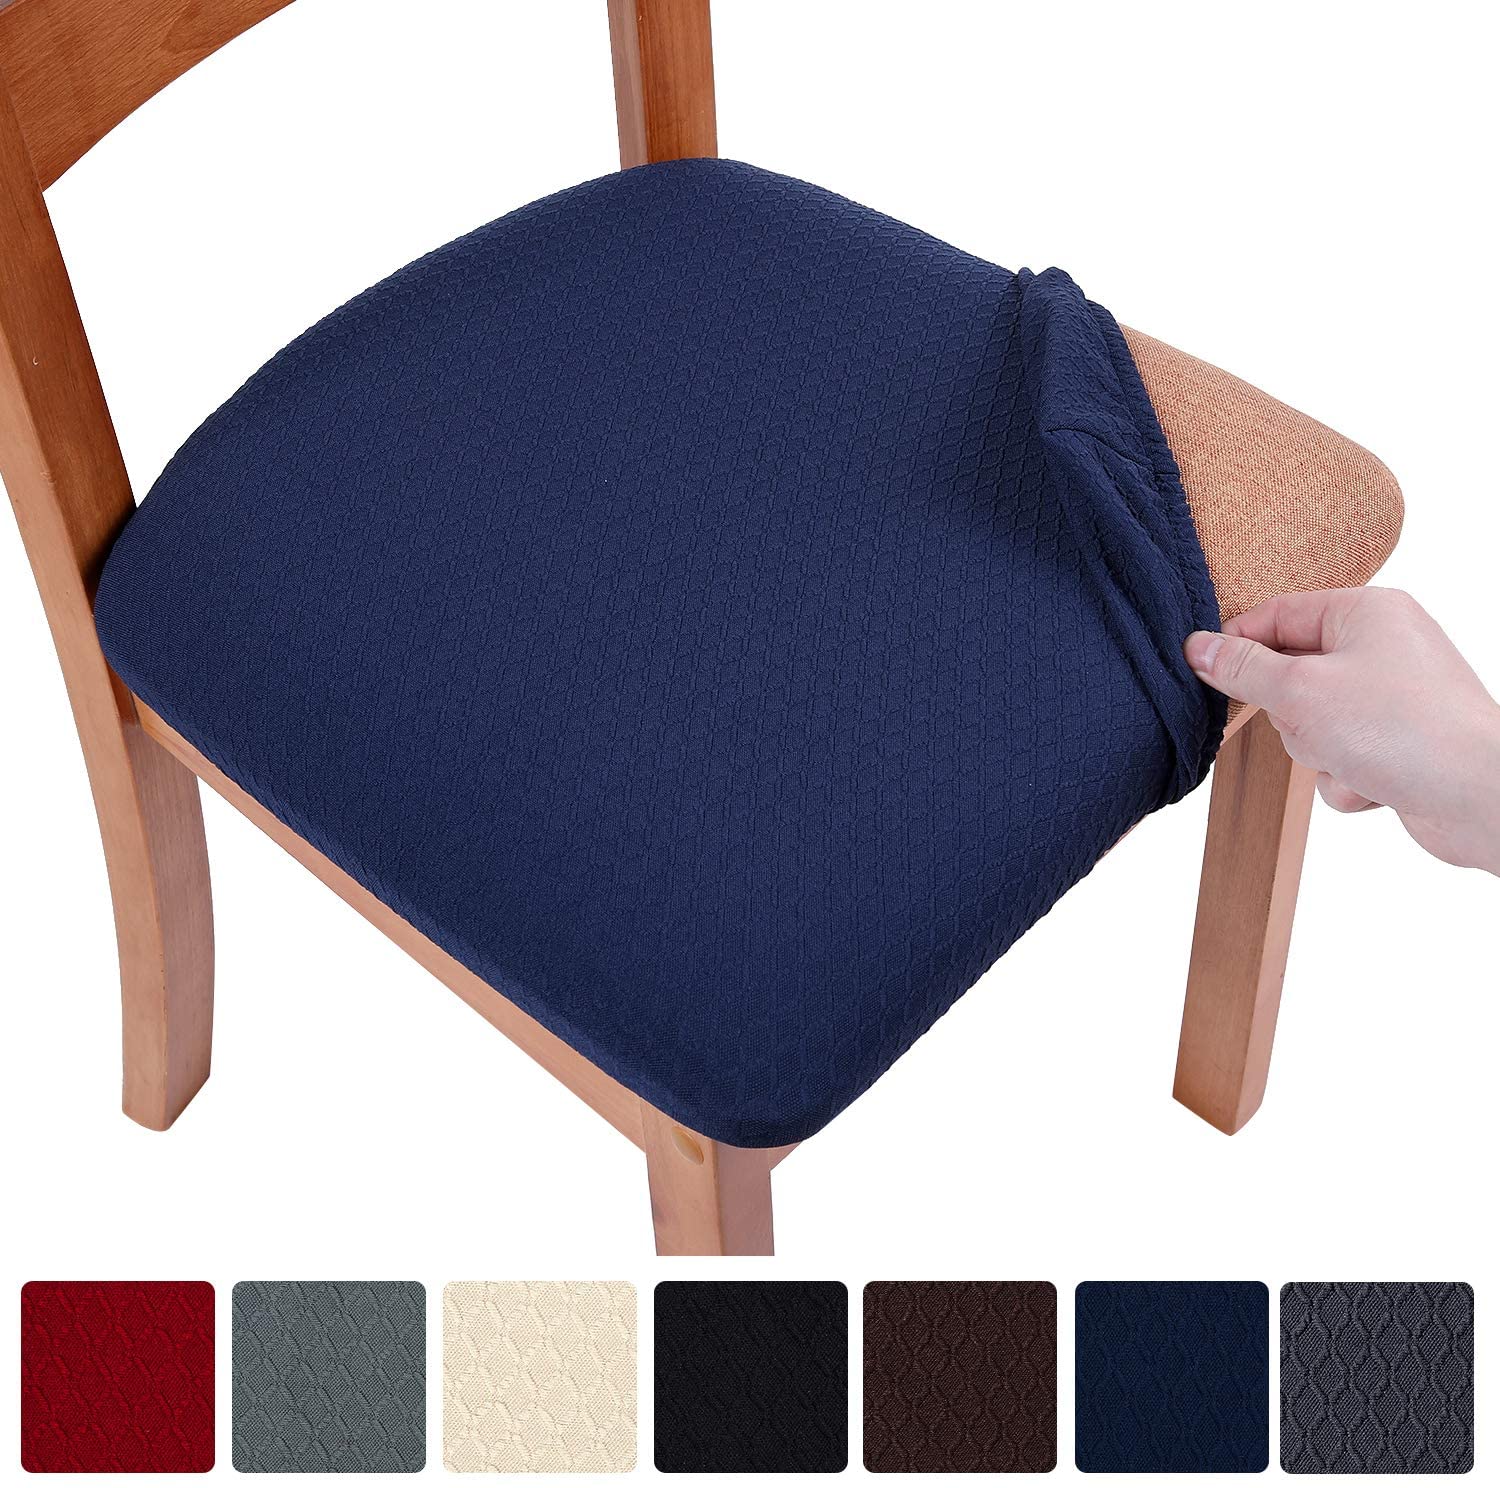 smiry Stretch Spandex Jacquard Dining Room Chair Seat Covers, Removable Washable Anti-Dust Dinning Upholstered Chair Seat Cushion Slipcovers - Set of 6, Navy Blue